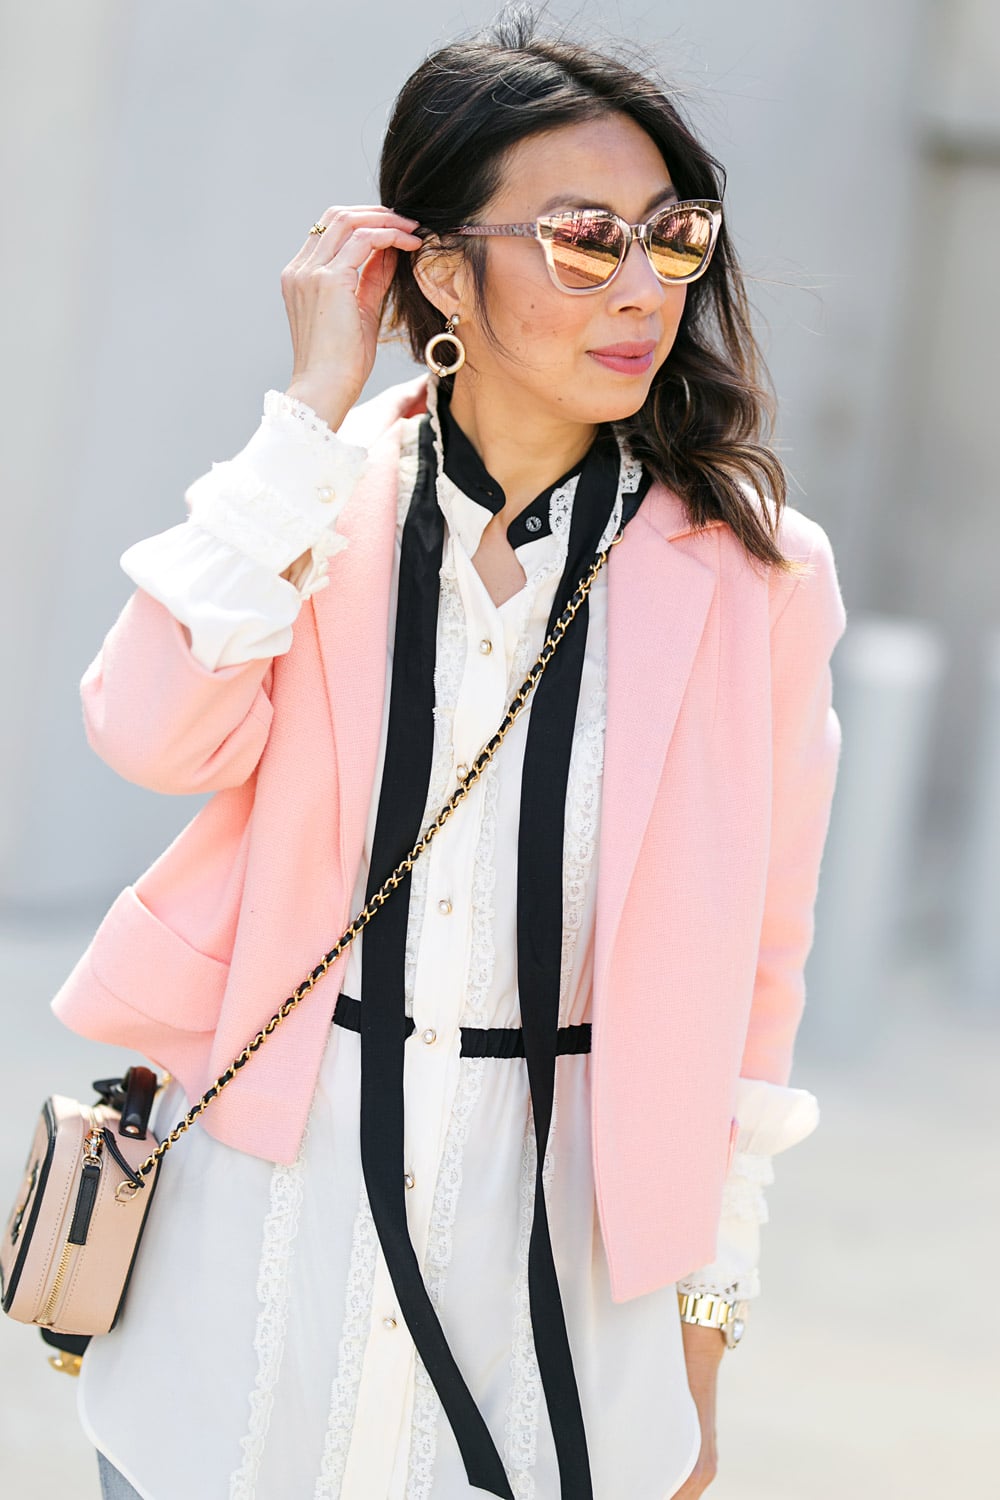 style of sam in cropped pink jacket and chanel inspired outfit